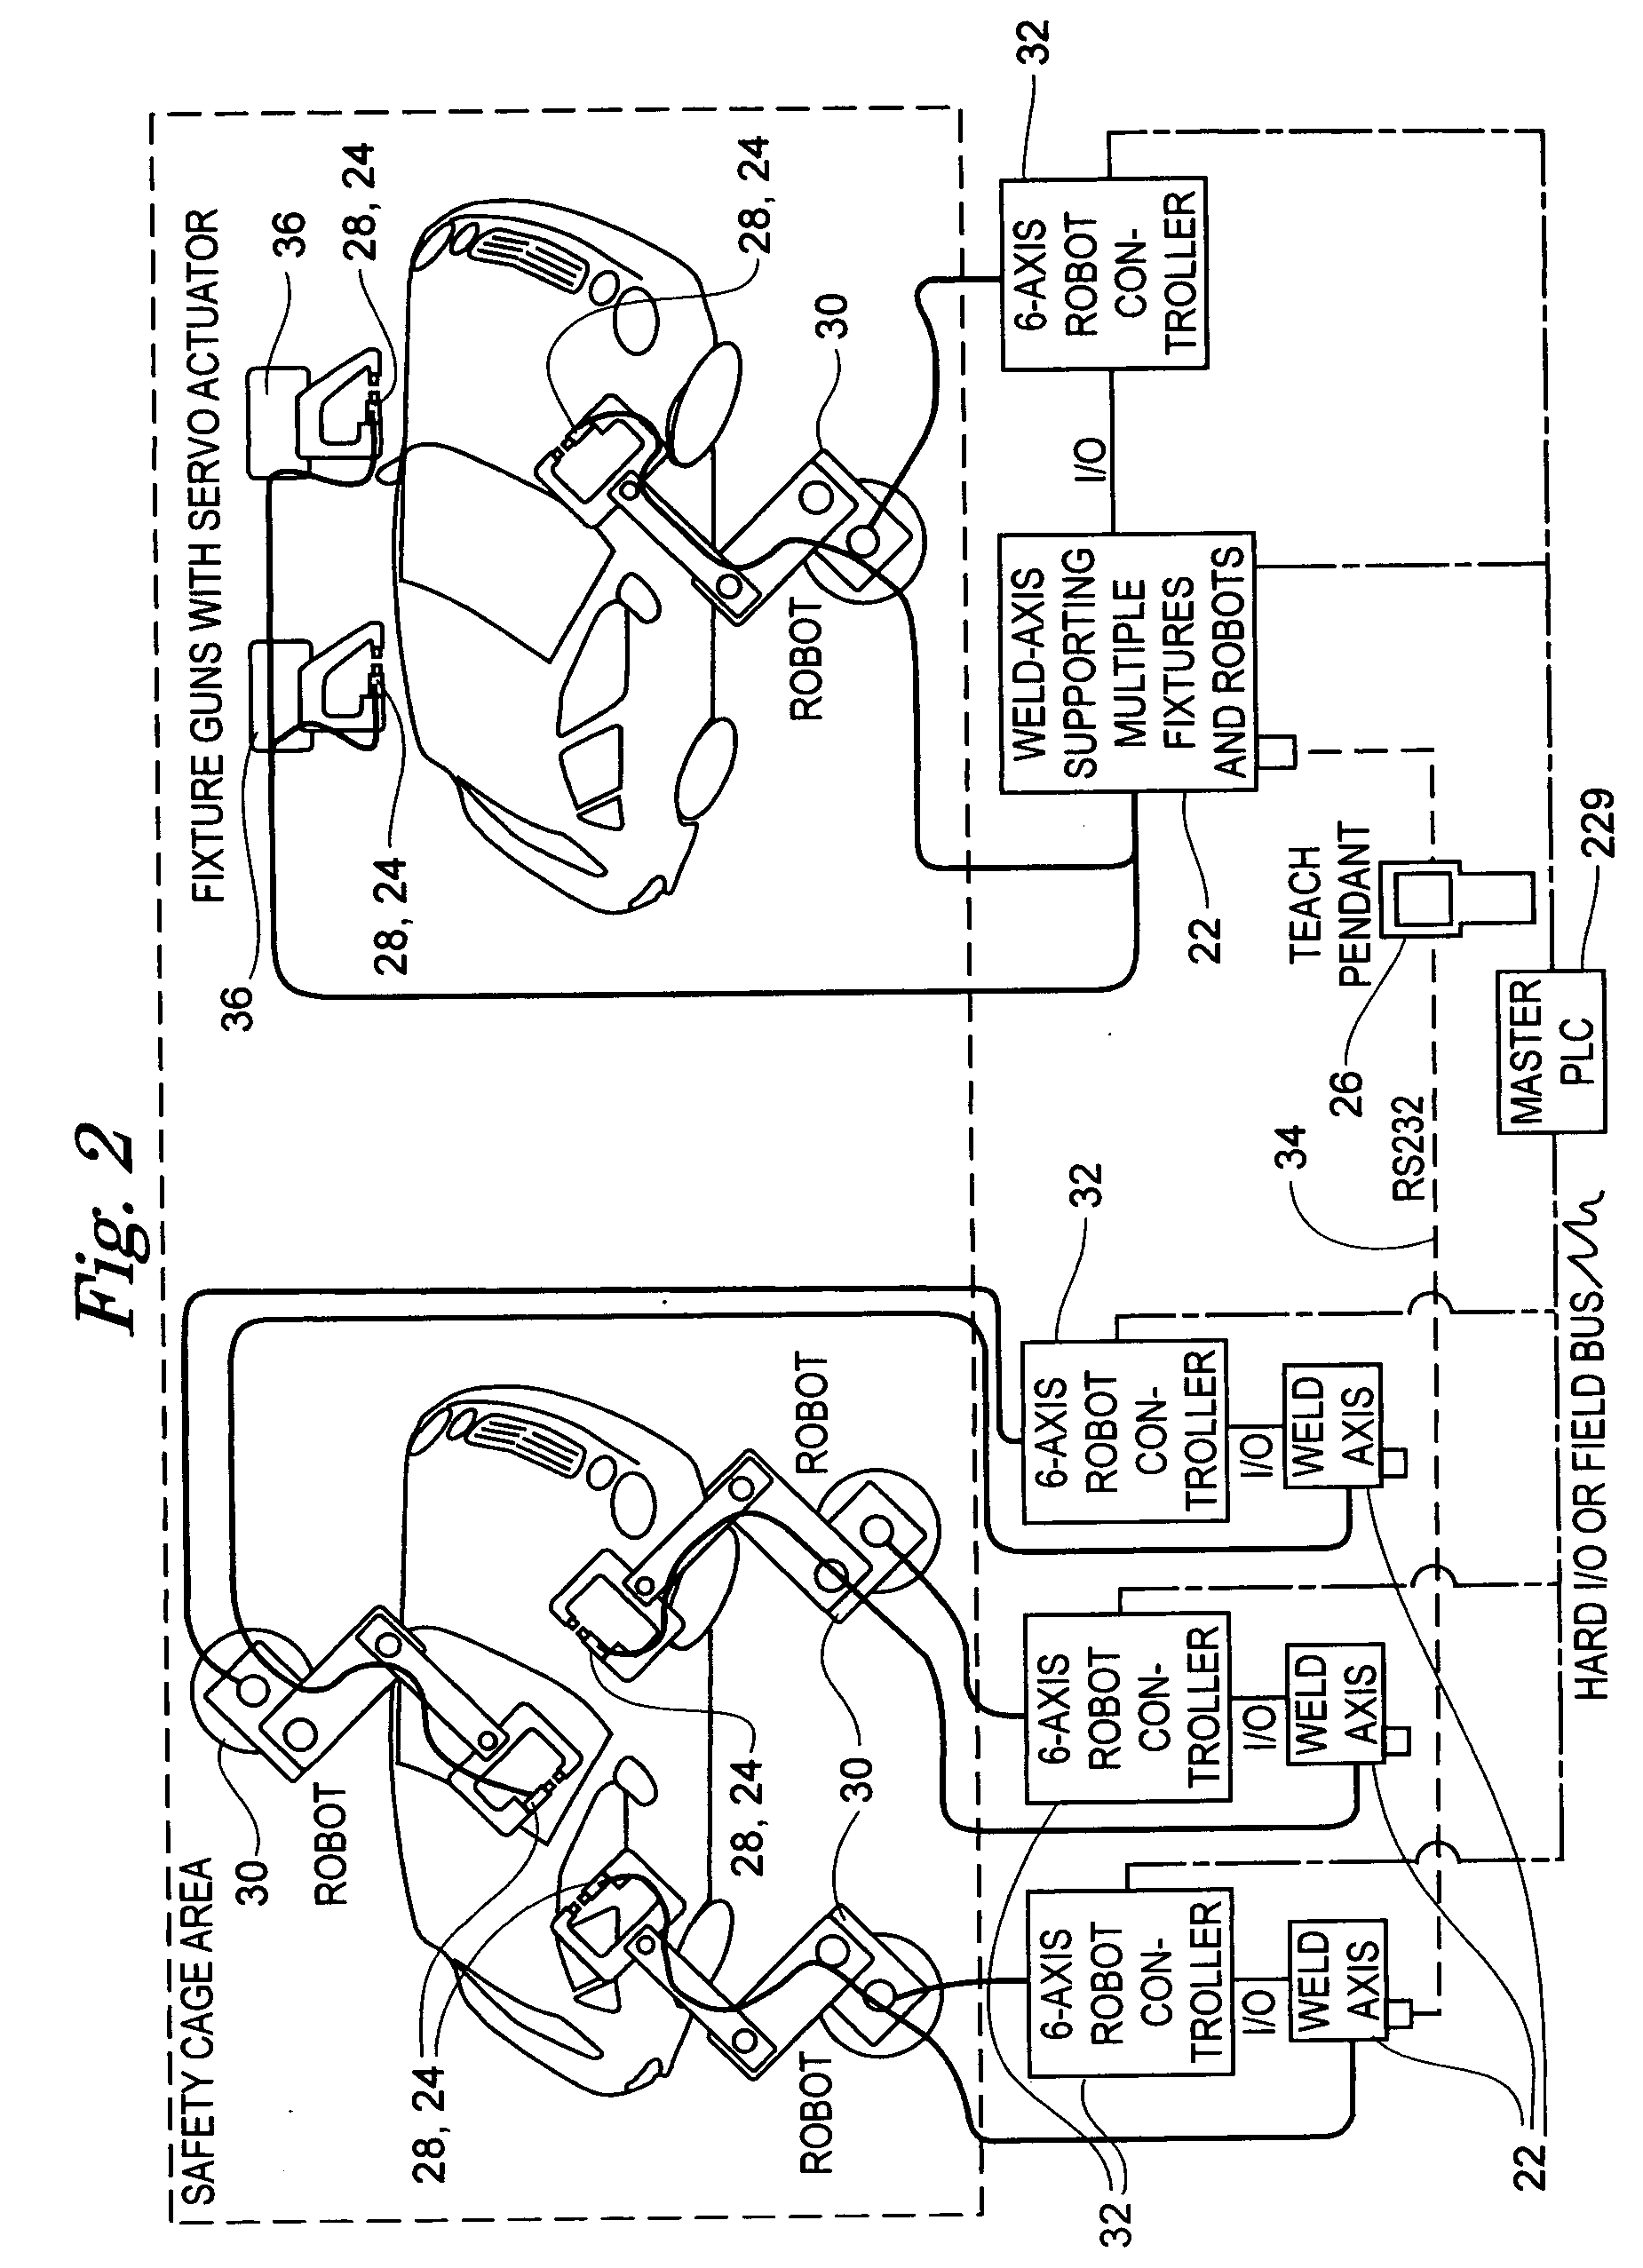 Adaptable servo-control system for force/position actuation